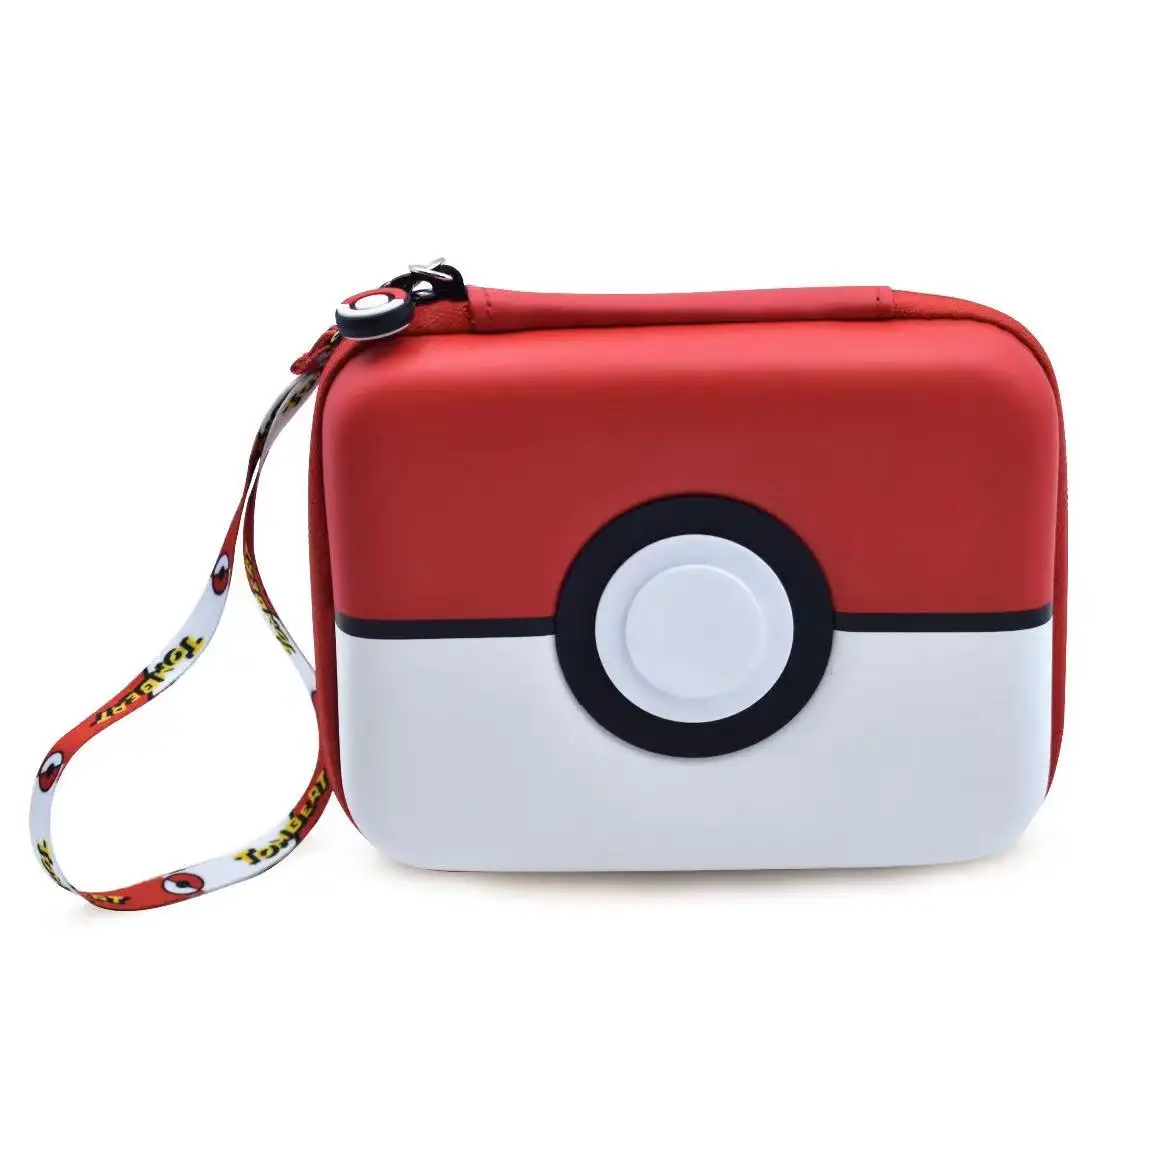 Carrying Case For Trading Cards Game Cards Binder Holder Hard-Shell Storage Box Holds 400 Cards